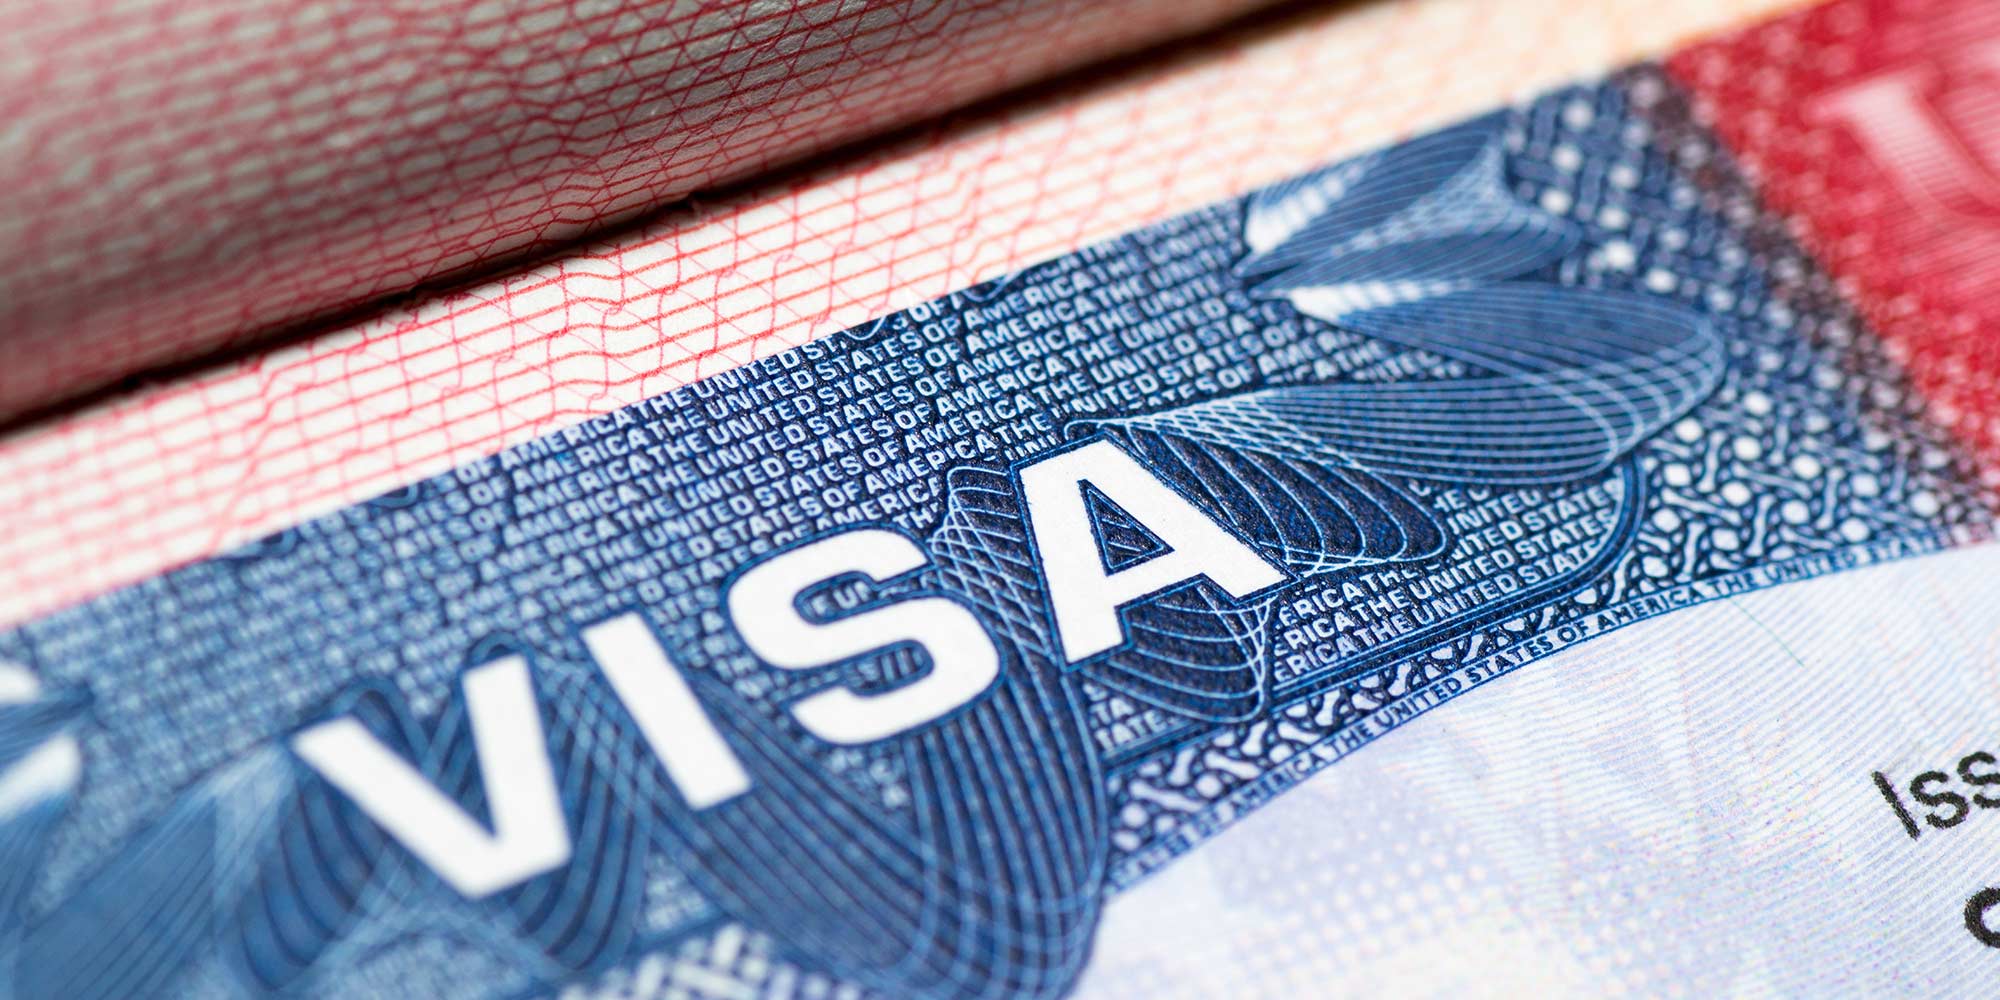 Get Your Visa Application Approved Without Issue